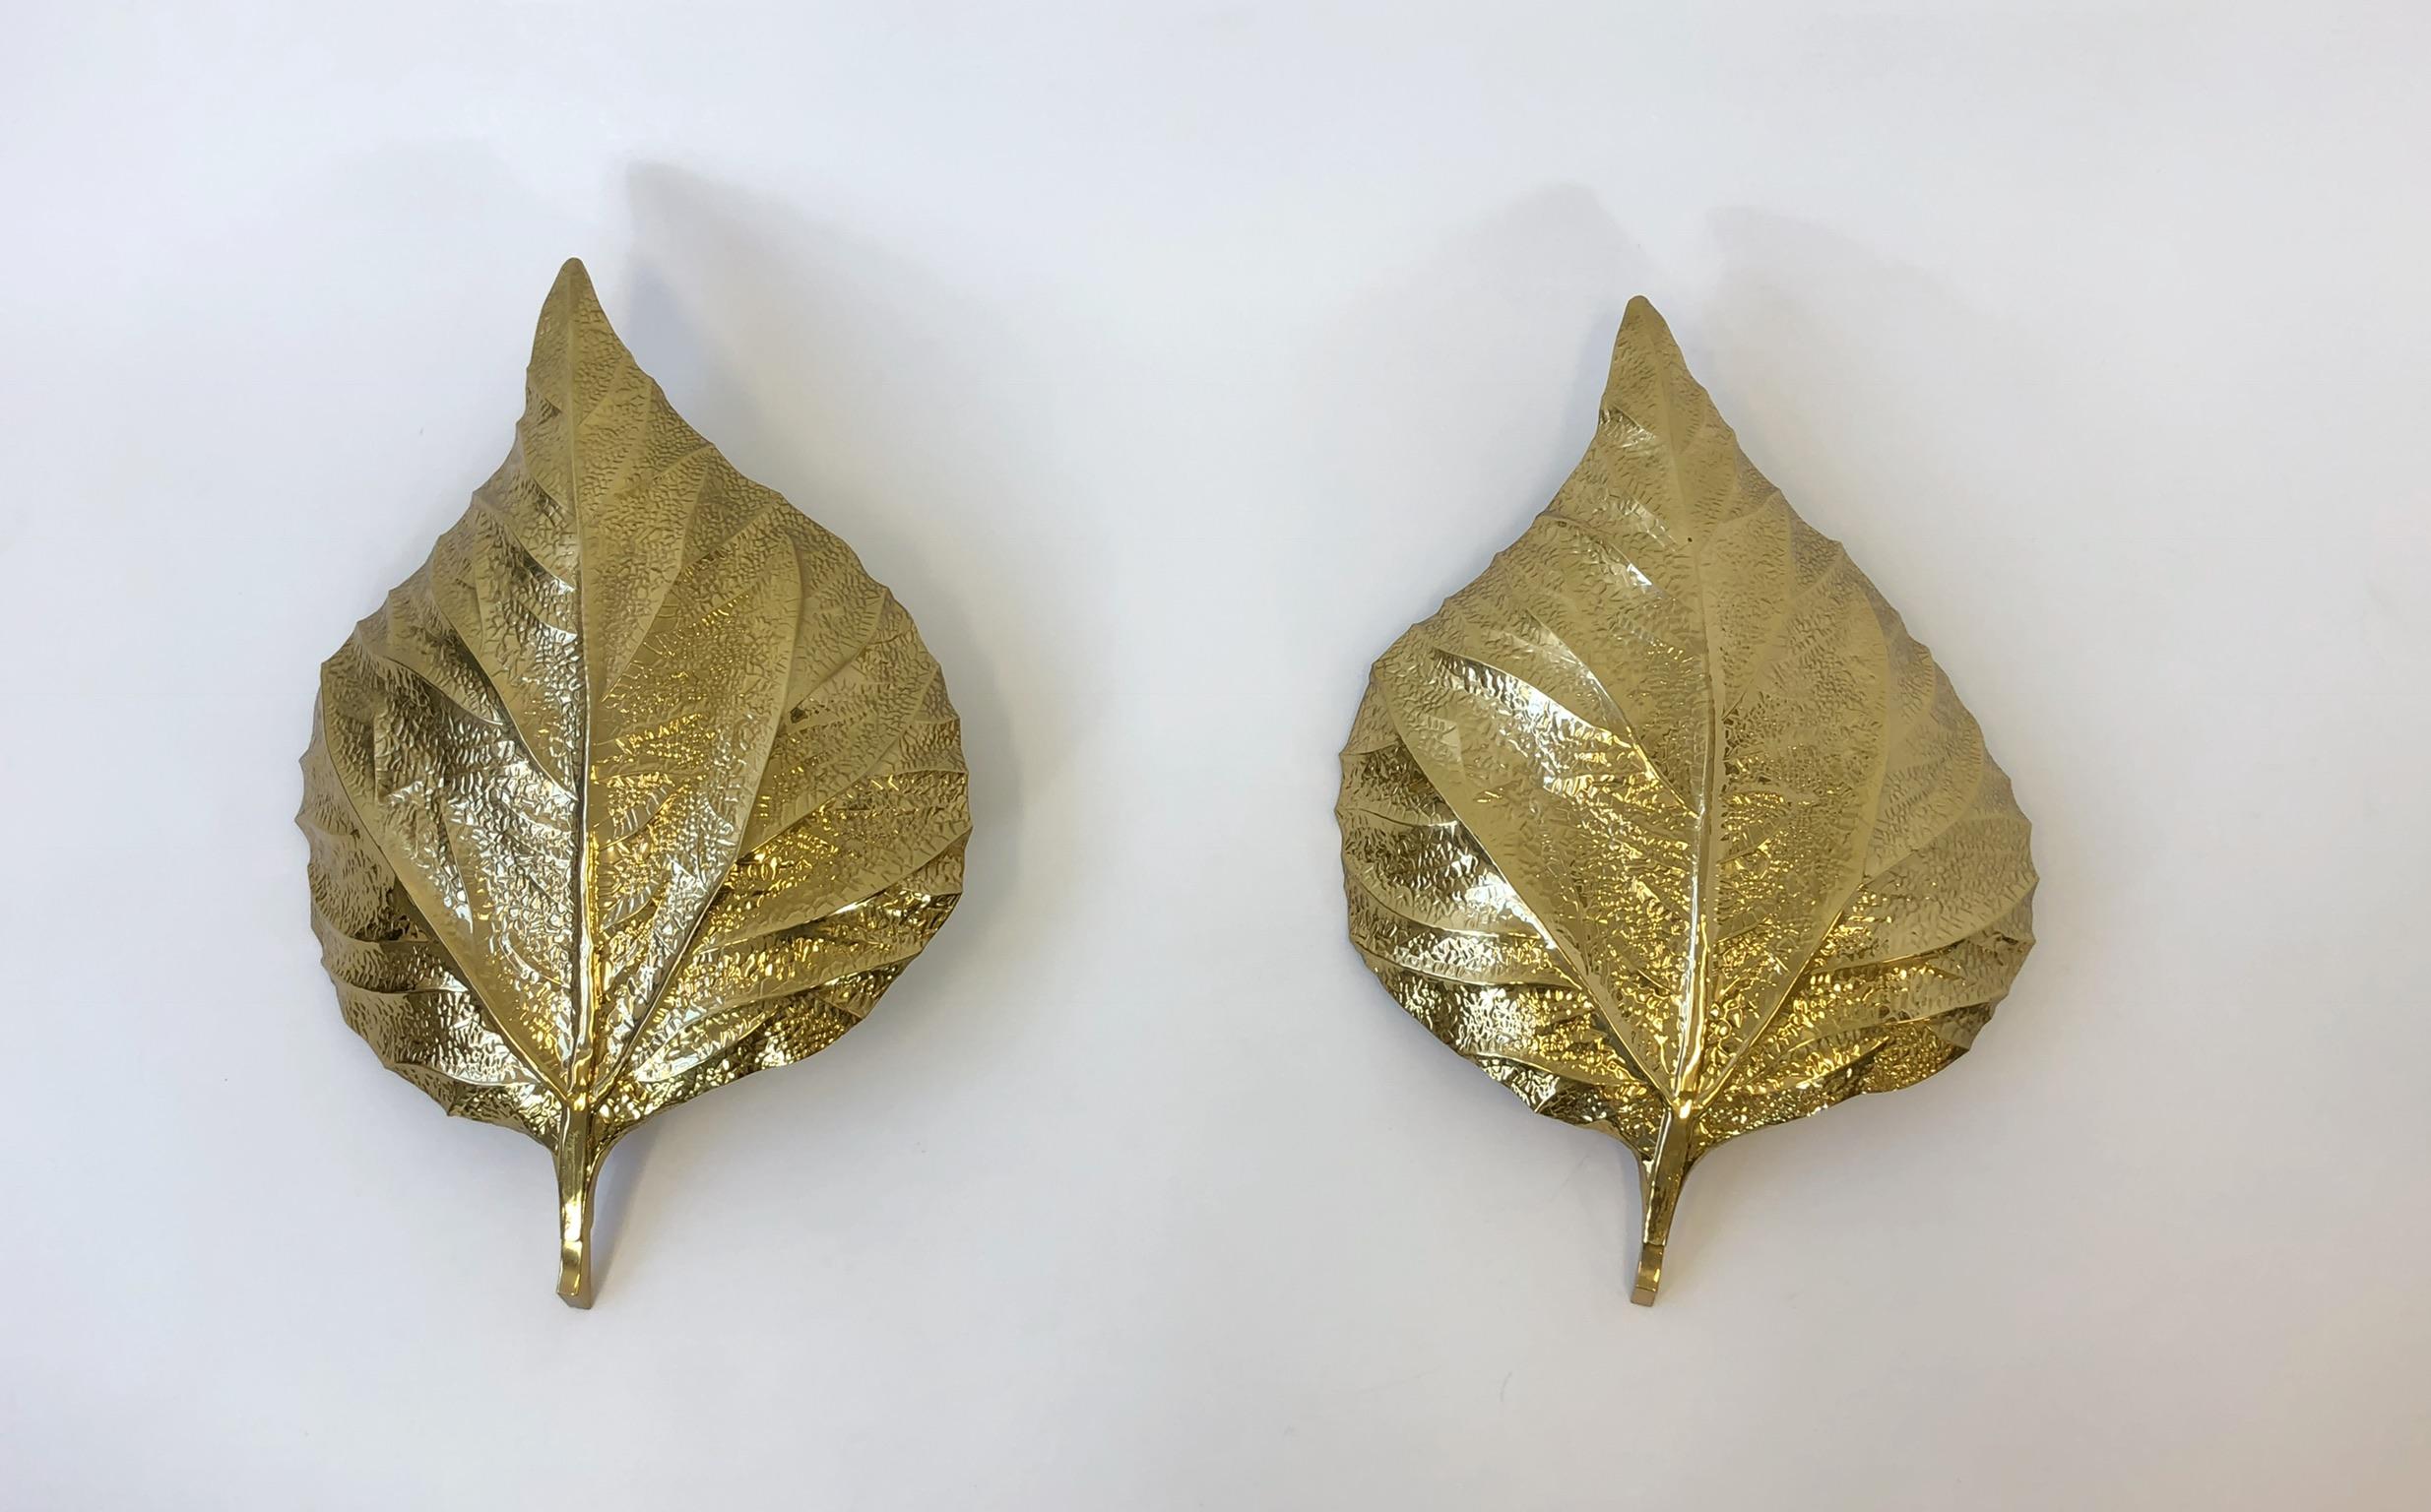 A spectacular pair of large brass rhubarb leafs wall sconces, design by Tommaso Barbi for Carlo Giorgi in the 1970s. The Scones can be direct wired or with a cord. The sconces take a regular Edison light bulb. 75w is highest recommended.
Dimension: